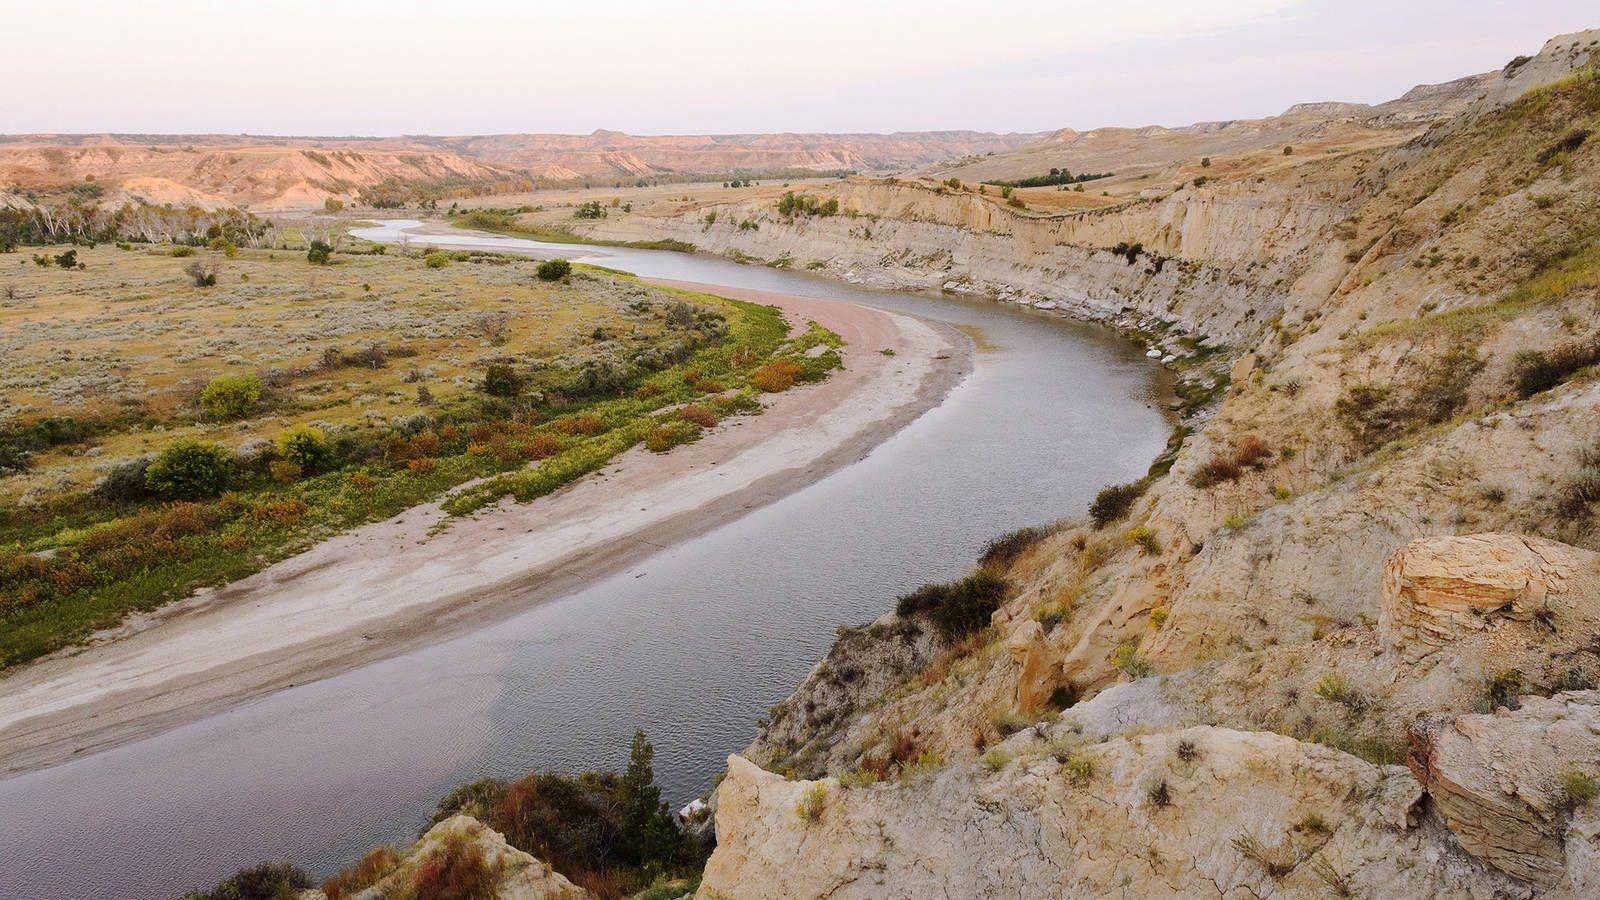 Refinery Threatens Theodore Roosevelt National Park · National